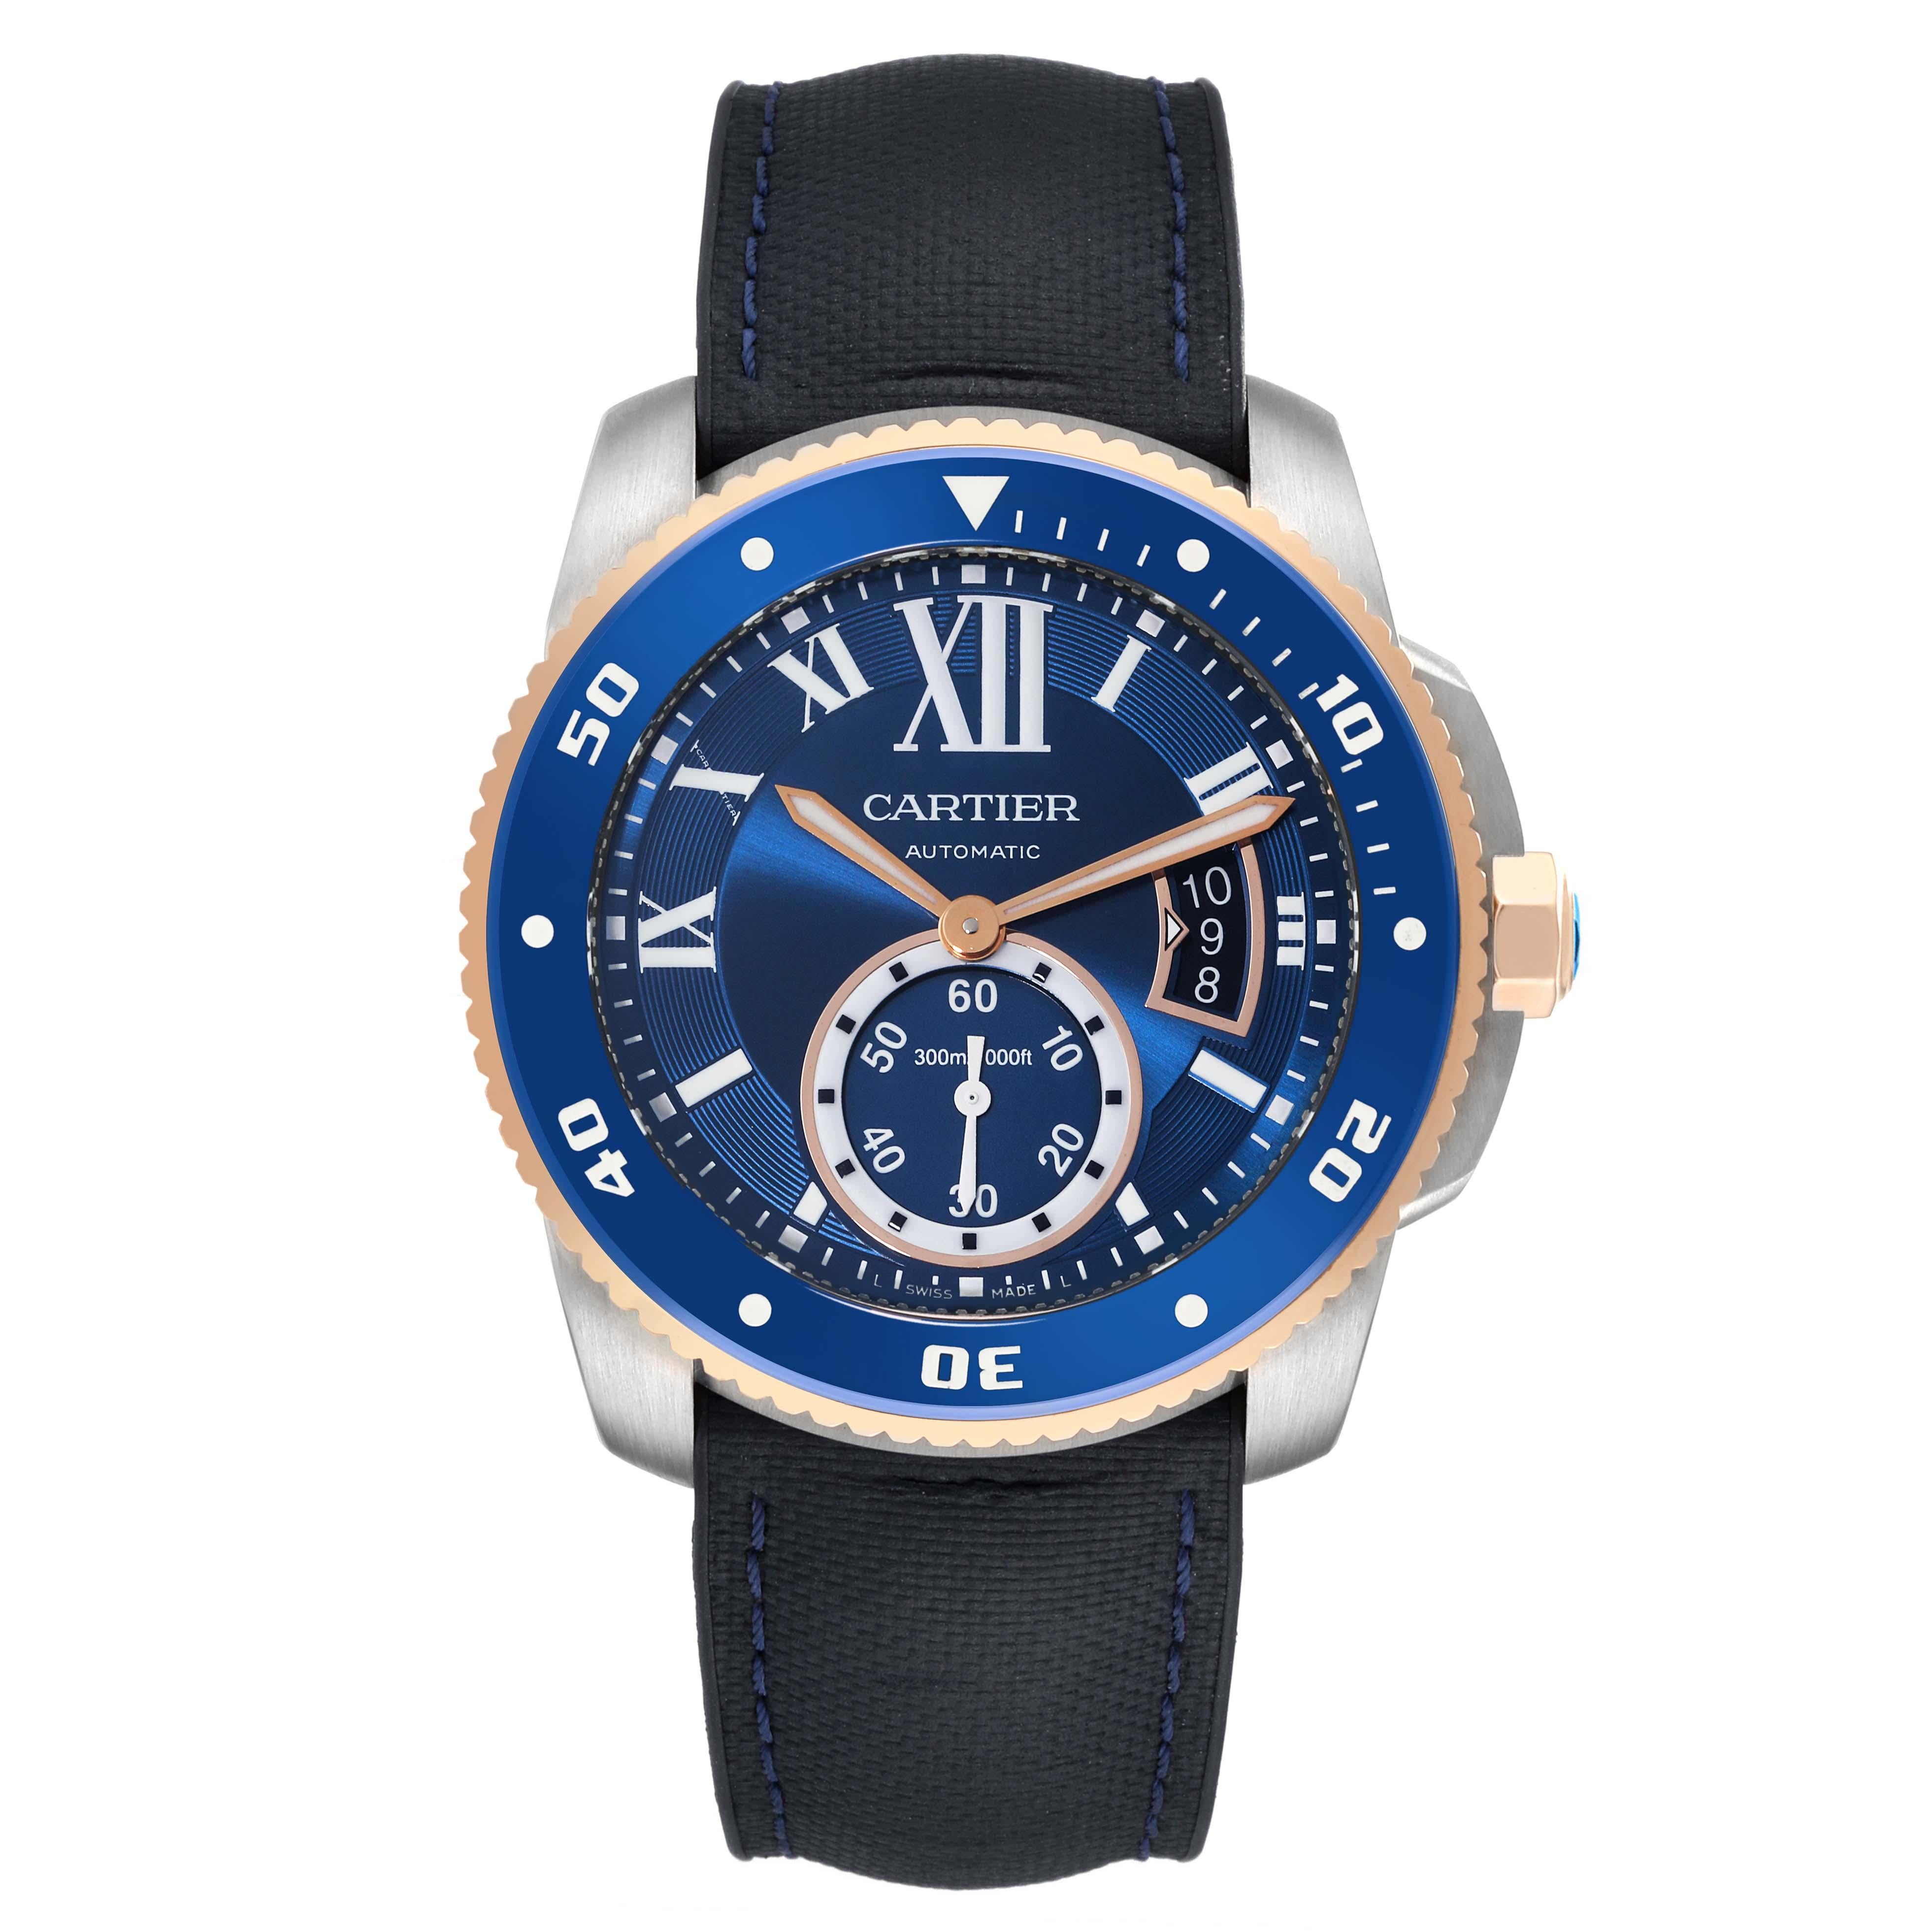 Cartier Calibre Diver Steel Rose Gold Blue Dial Mens Watch W2CA0008 Card. Automatic self-winding movement. Stainless steel round case 42.0 mm in diameter. Octagonal 18k rose gold crown set with faceted blue spinel. Case thickness: 11 mm. Blue ADLC